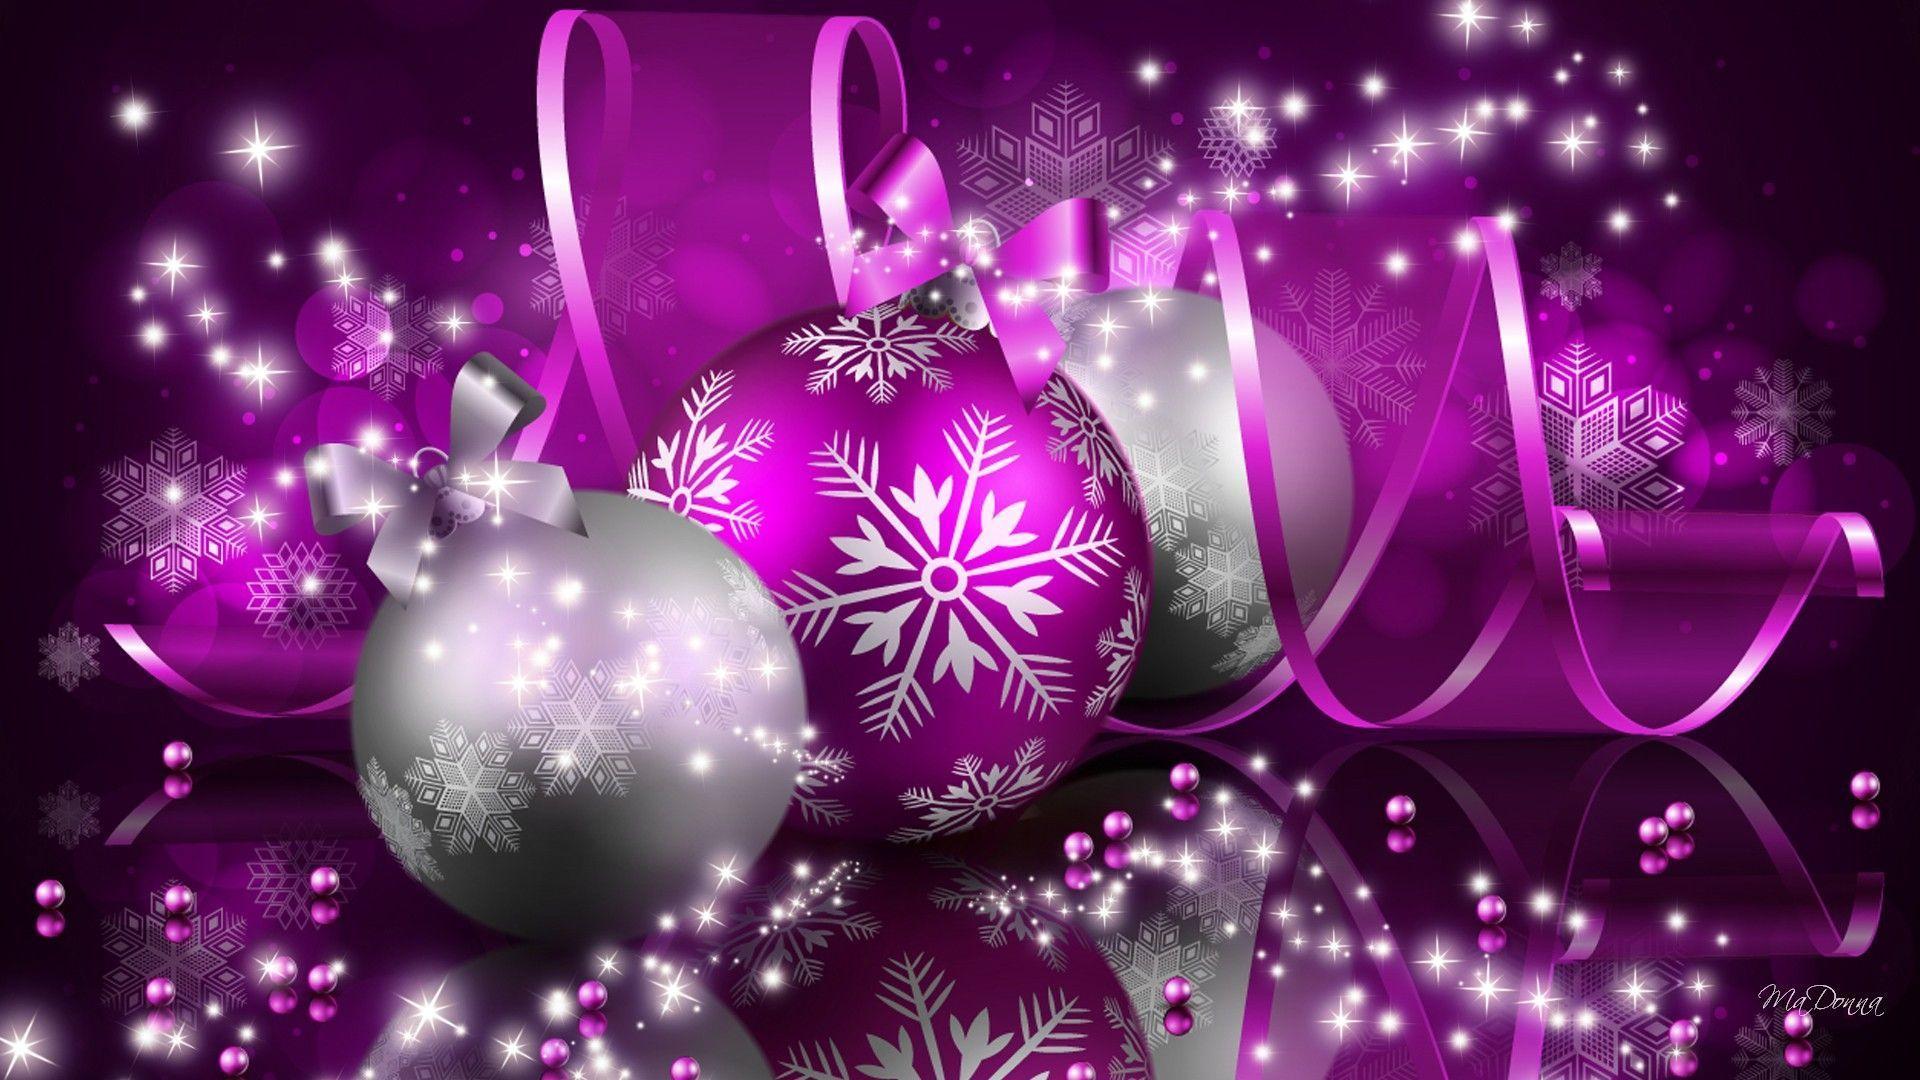 Wallpaper For > Purple Christmas Ornament Background